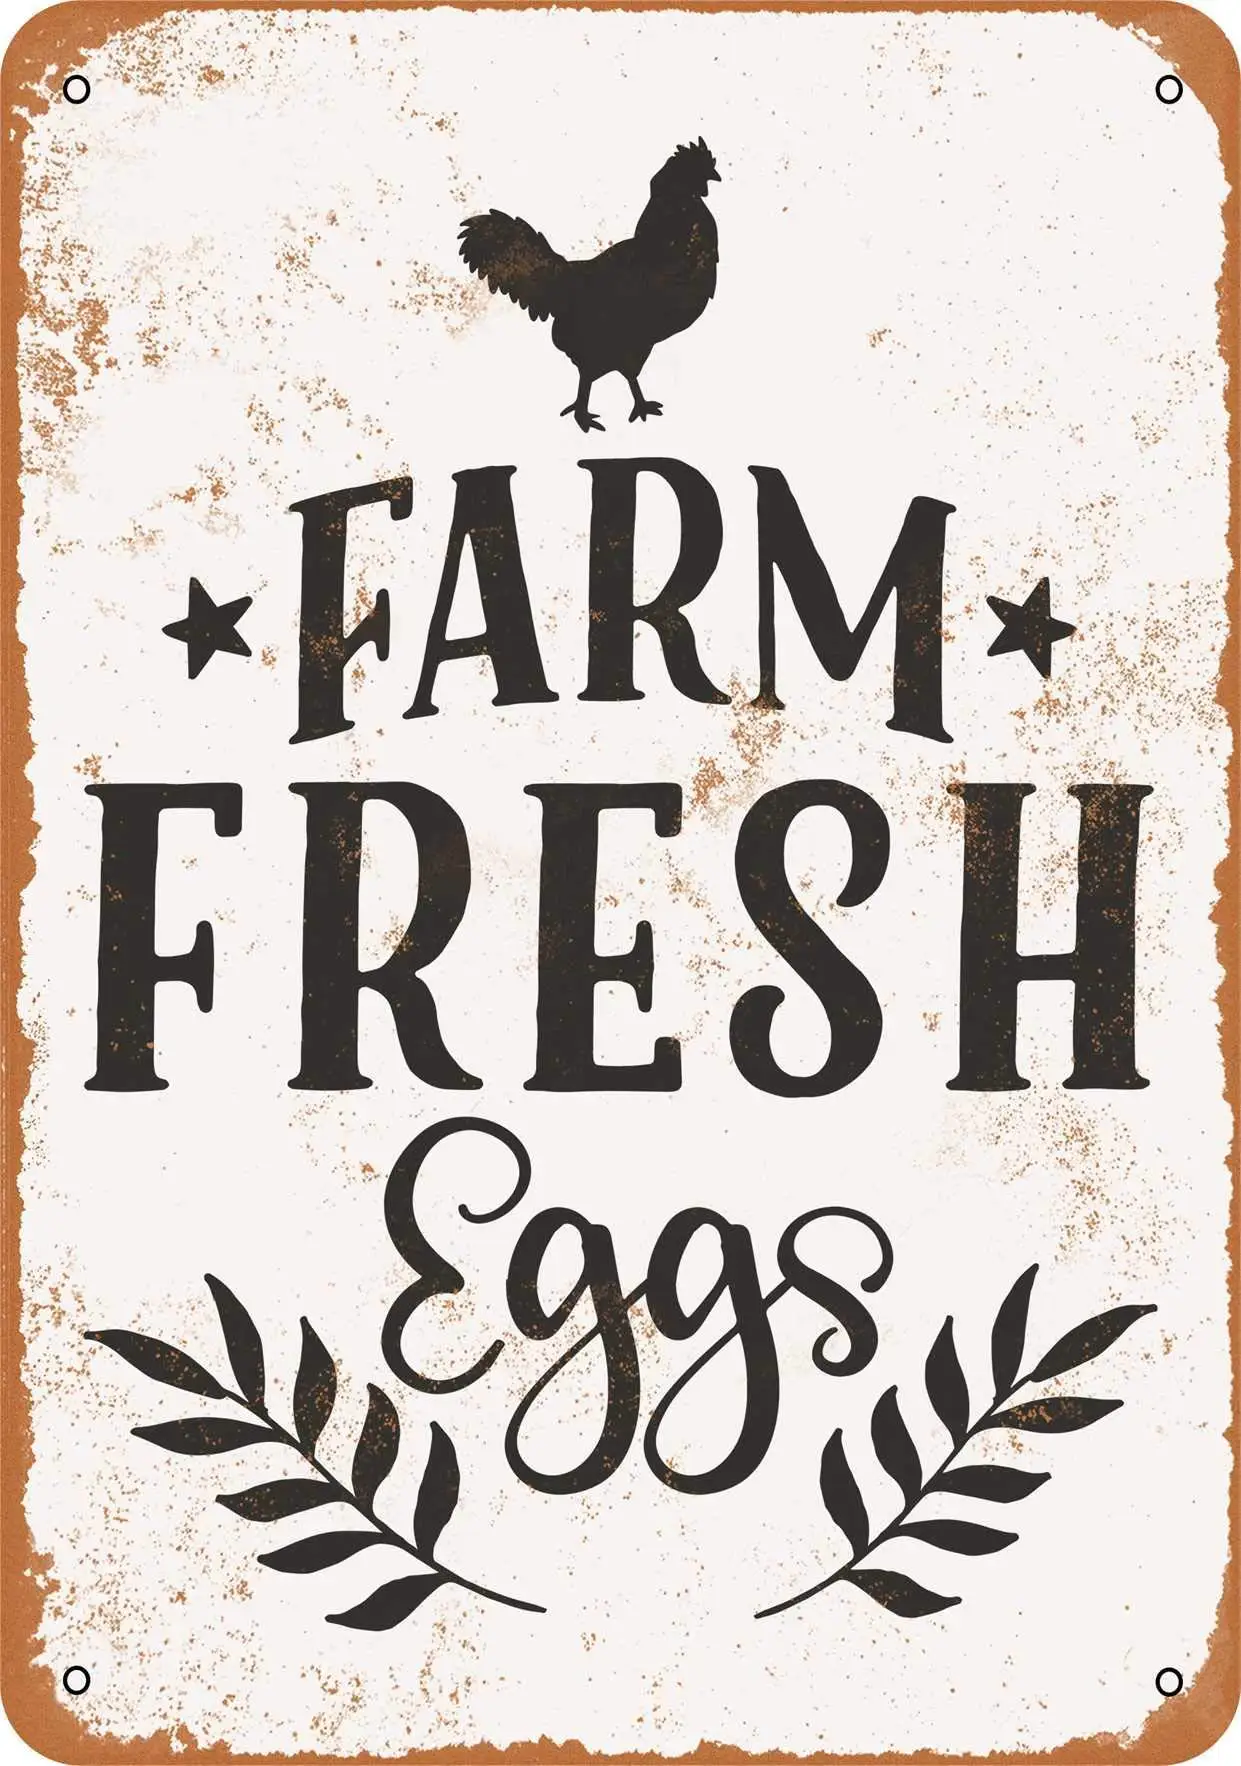 

Farm Fresh Eggs Metal Sign Vintage Plaque Wall Decoration Farm Bar Country Supermarket Home Wall Decoration 8x12 Inches